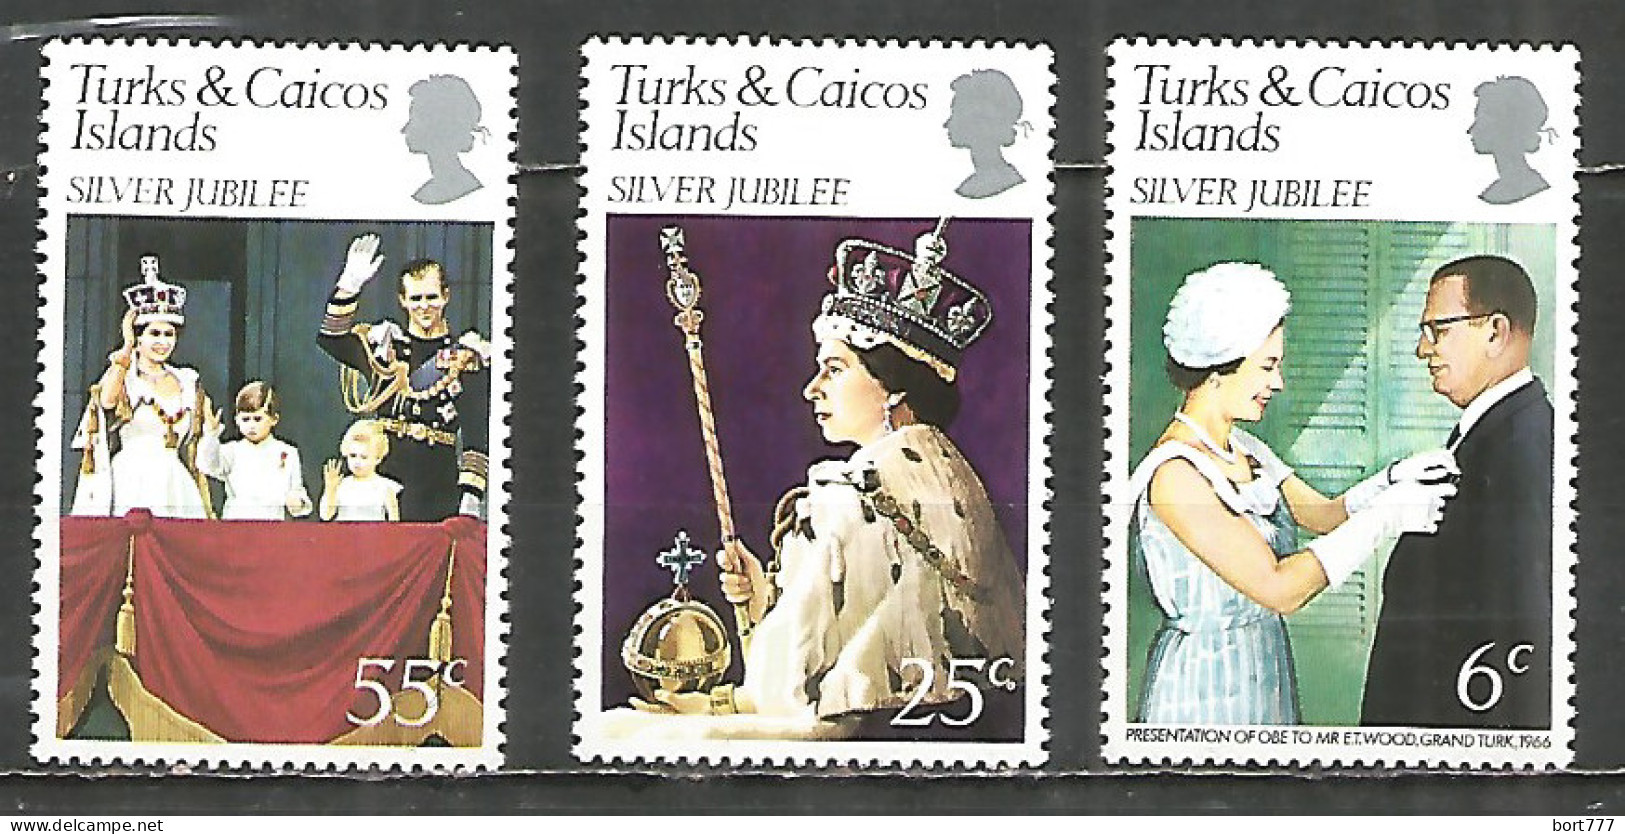 Turks & Caicos Islands 1977 Mint Stamps MNH(**) Set Famous People Royals - Turks & Caicos